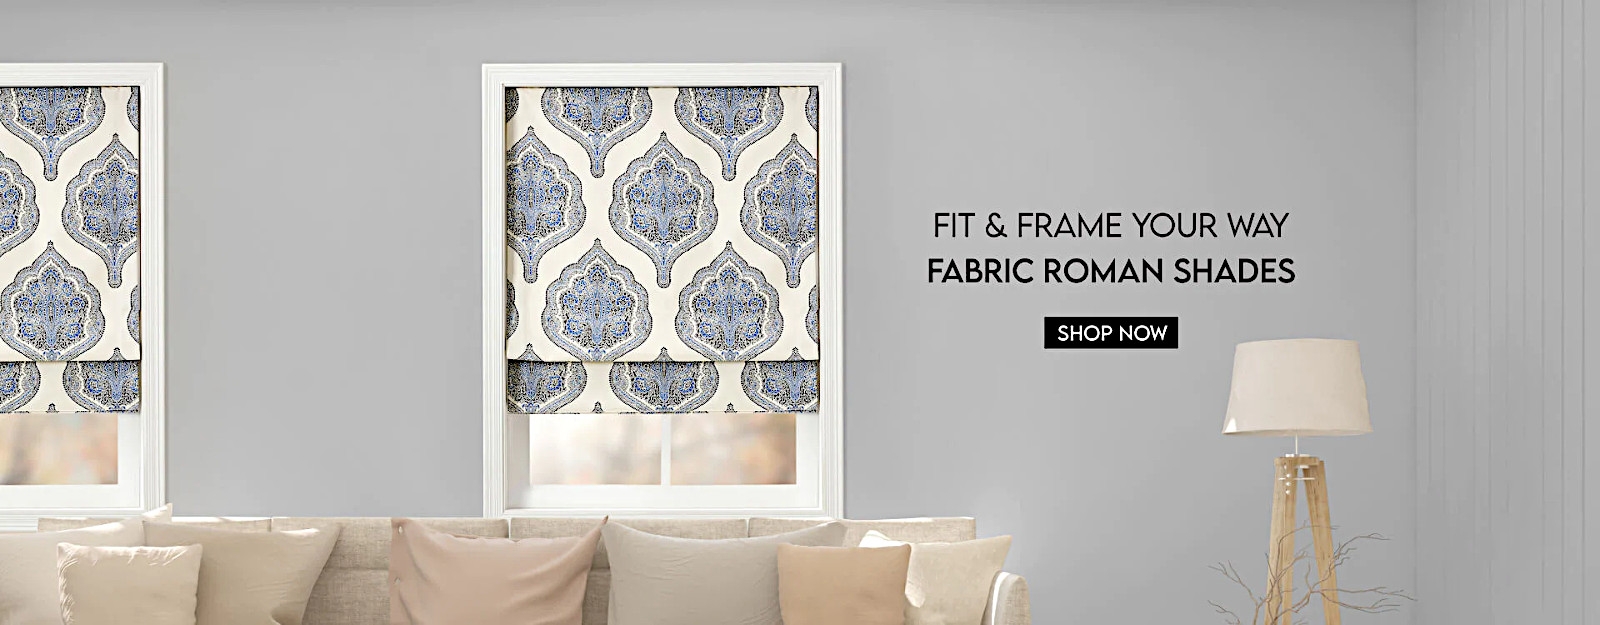 Recommended roman shades